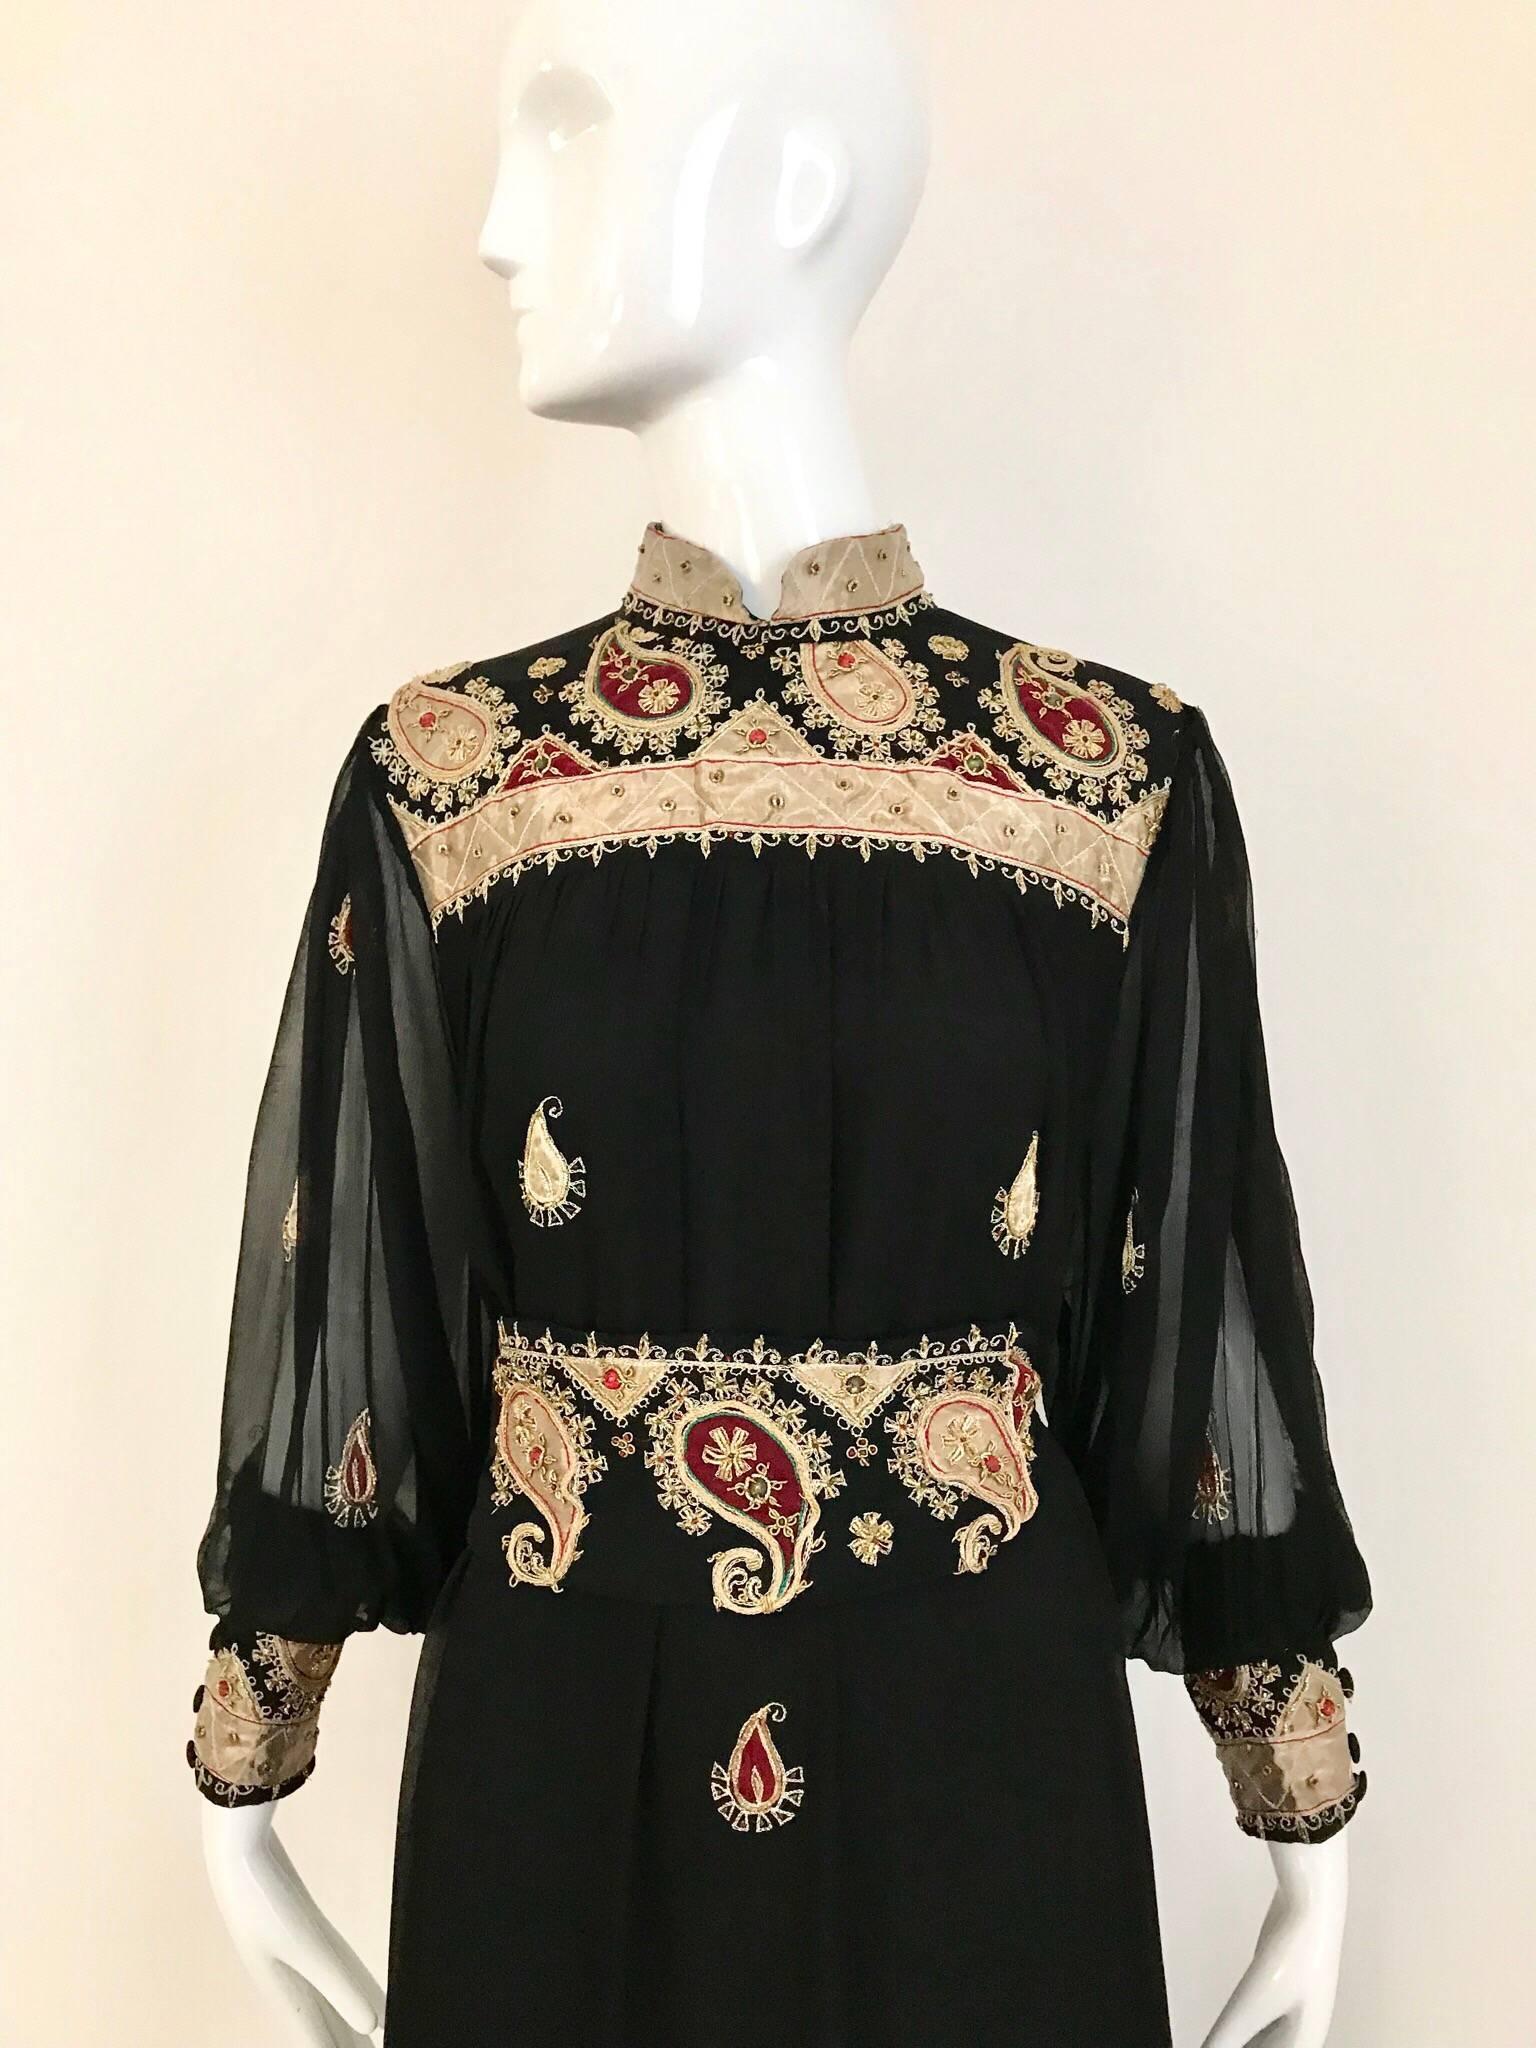 This 1970s Neiman Marcus black silk kaftan maxi dress has an ethnic feel from the gold paisley embroidery in the applique and the nehru collar, giving it a distinct Indian flavor. The billowy sleeves sport wide cuffs with more embroidery. And the